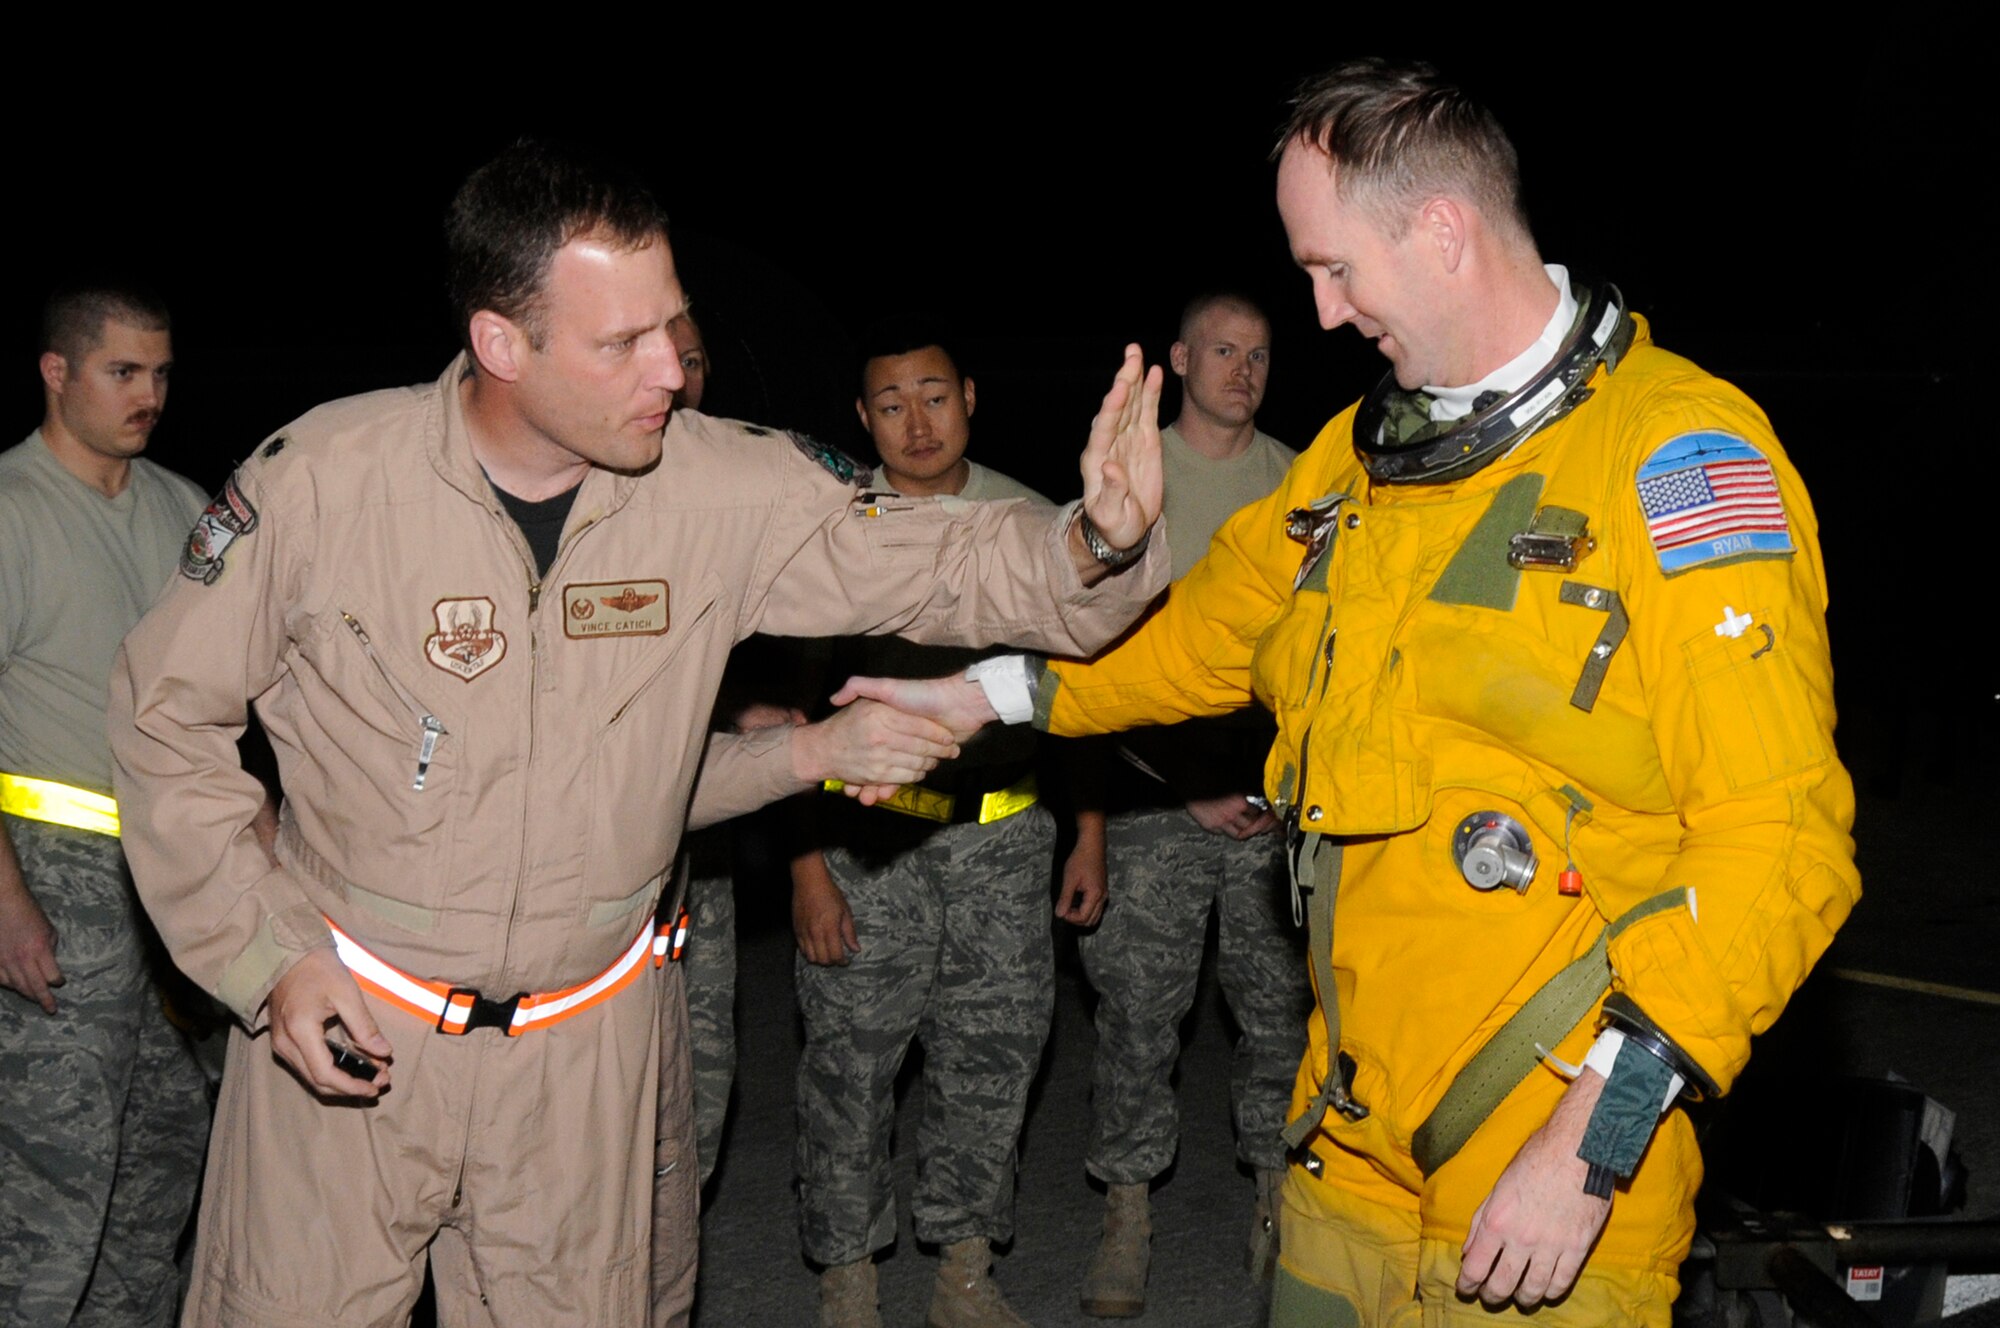 SOUTHWEST ASIA -- Lt. Col. Vincent Catich, 99th Expeditionary Reconnaissance Squadron, commander, tacks a 2000 hour patch onto Major Thomas Ryan, 99th Expeditionary Reconnaissance Squadron, mission pilot, Jan. 9. Maj. Ryan was met by leadership and fellow 99th ERS personnel to congratulate him on becoming the 25th pilot to reach the 2000 hour milestone behind the helm of a U-2 Dragonlady. Maj. Ryan is deployed to the 380th Air Expeditionary Wing from the 9th Reconnaissance Squadron, Beale AFB, Calif. and hails from Sneads Ferry, N.C. Calif. Lt. Col. Catich is from Aurora, Ill. (U.S. Air Force photo by Senior Airman Brian J. Ellis)(Released)